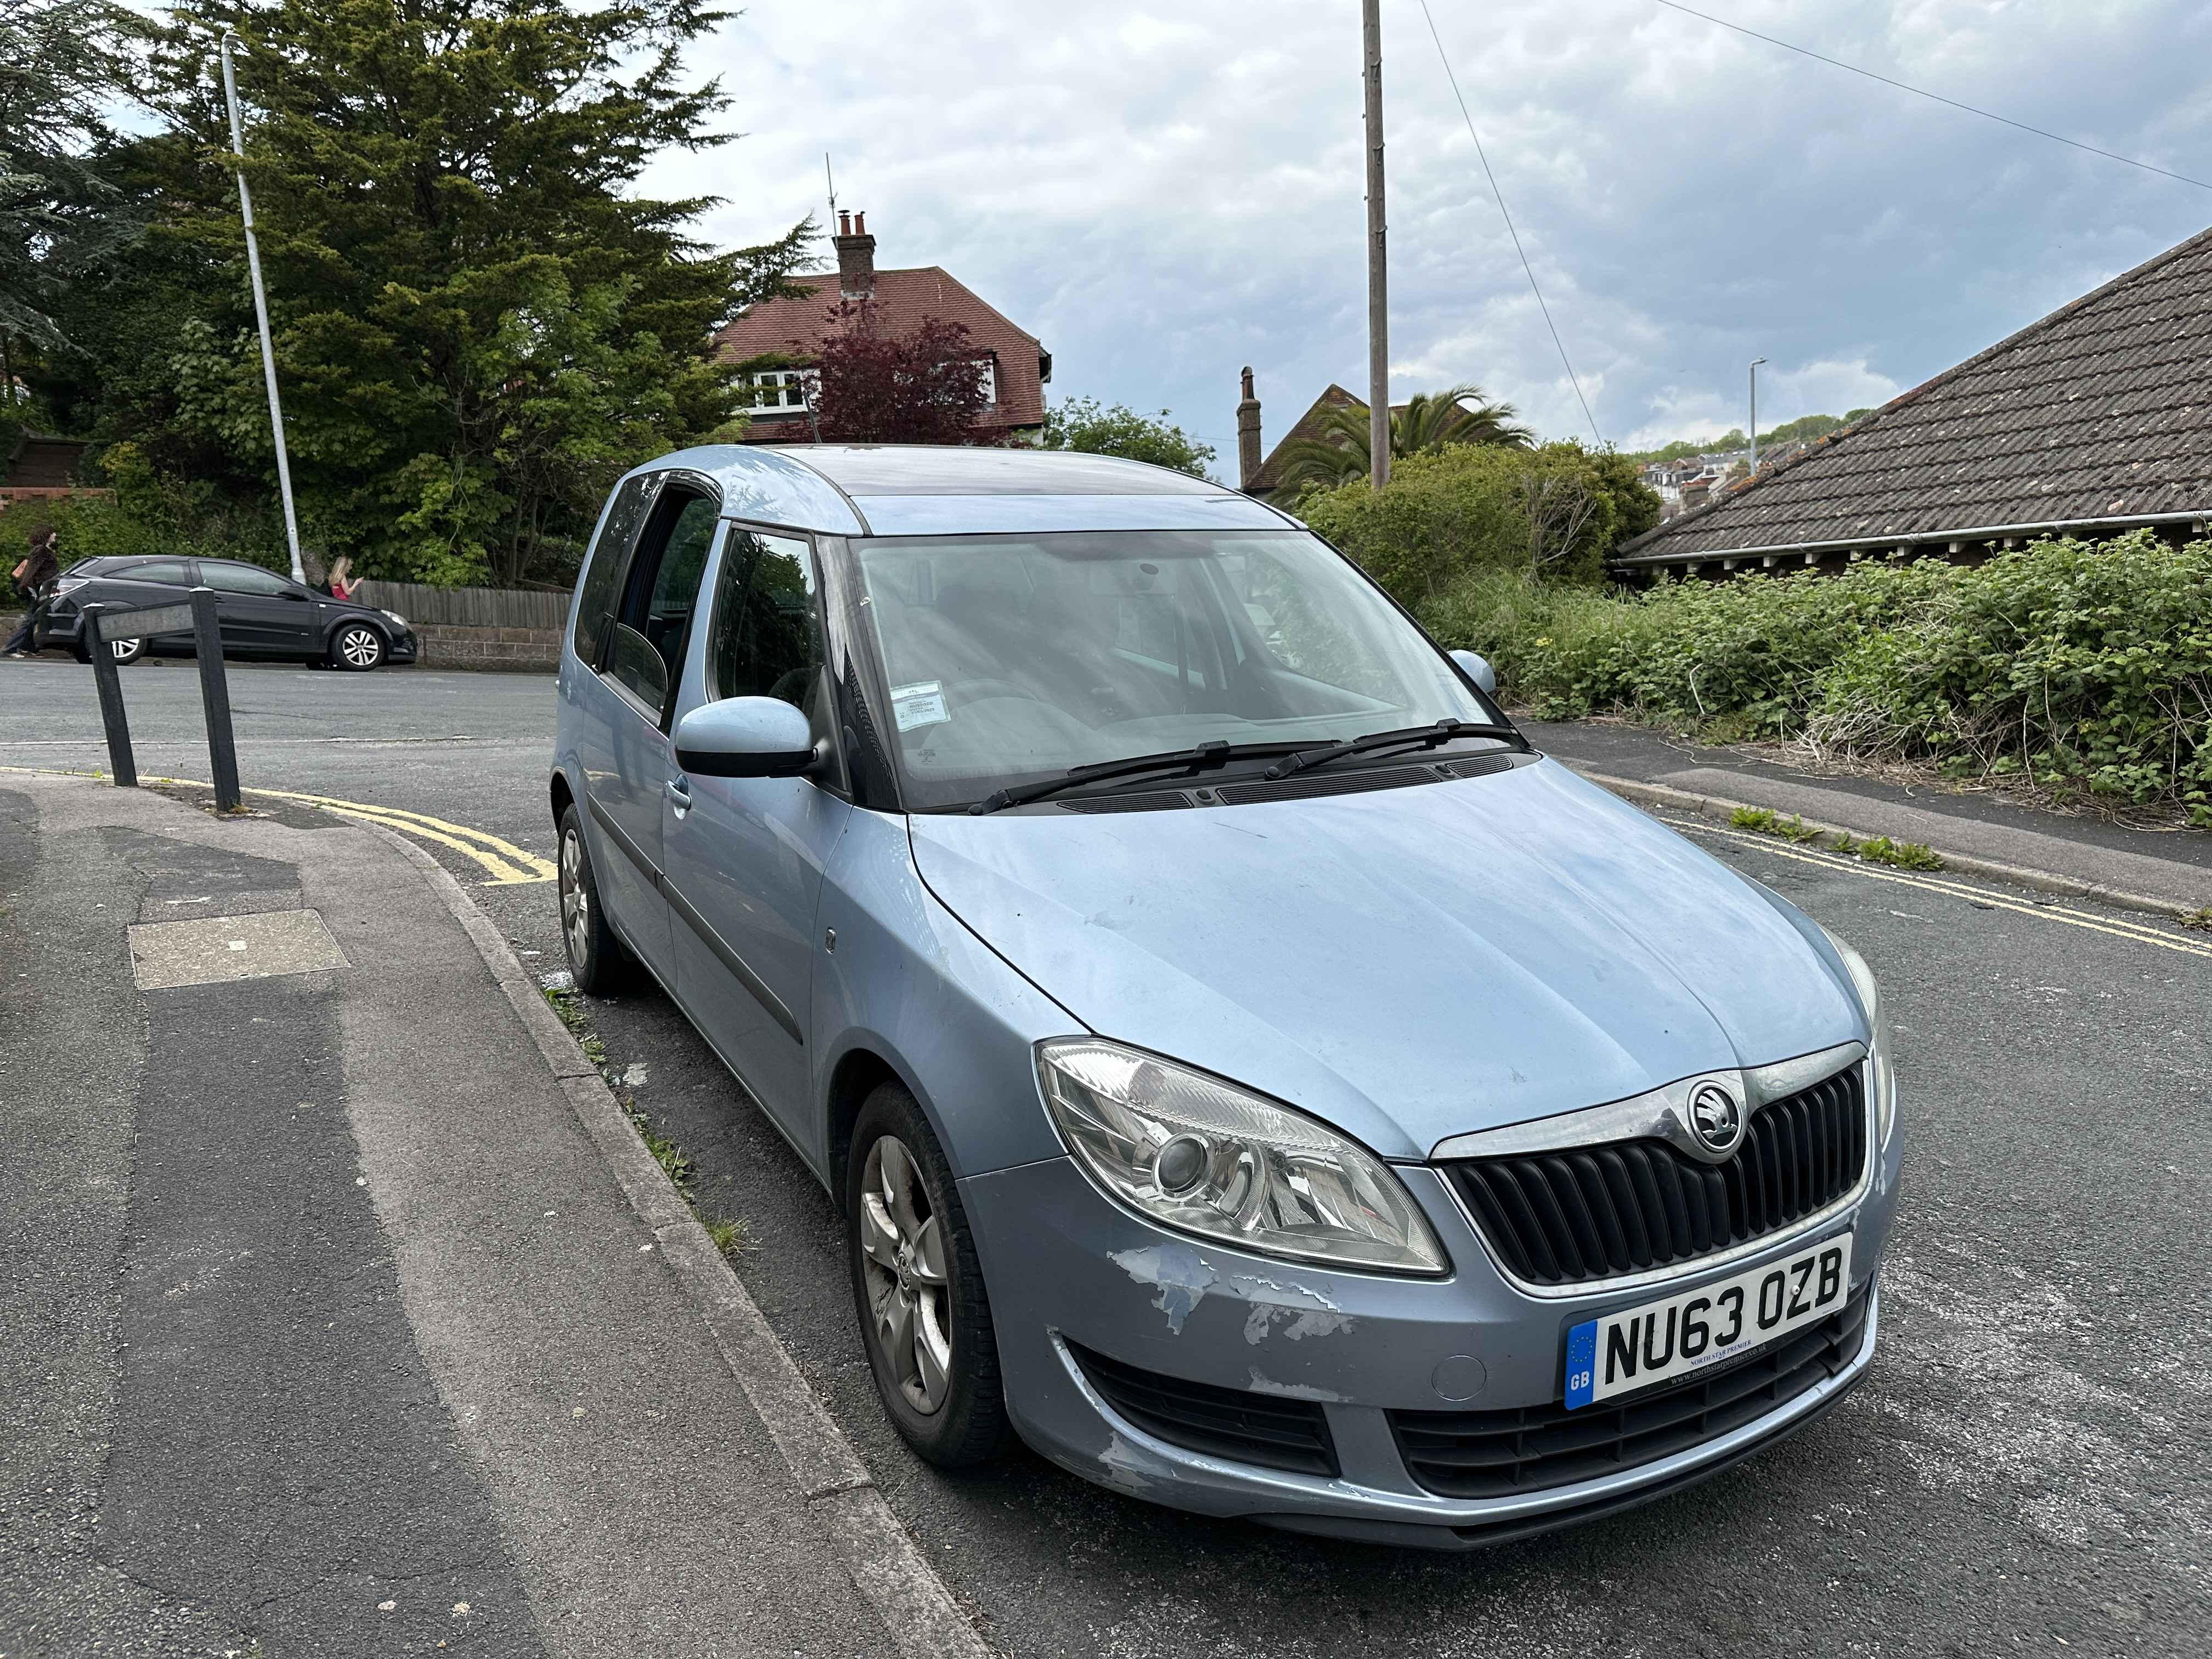 Photograph of NU63 OZB - a Blue Skoda Roomster parked in Hollingdean by a non-resident. The second of nineteen photographs supplied by the residents of Hollingdean.